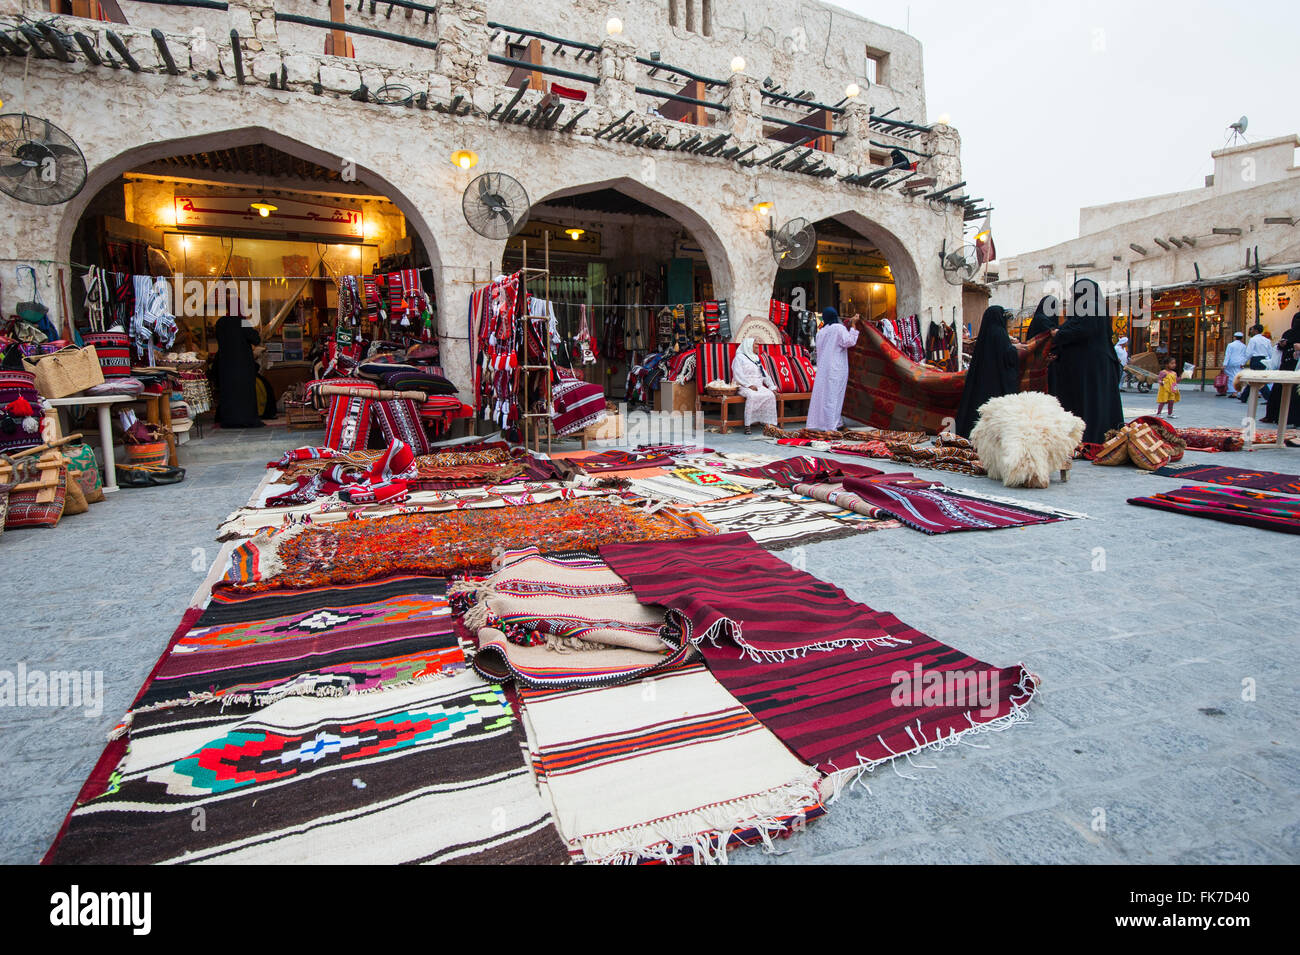 View of shop selling traditional crafts at Souk Waqif in Doha Qatar Stock Photo